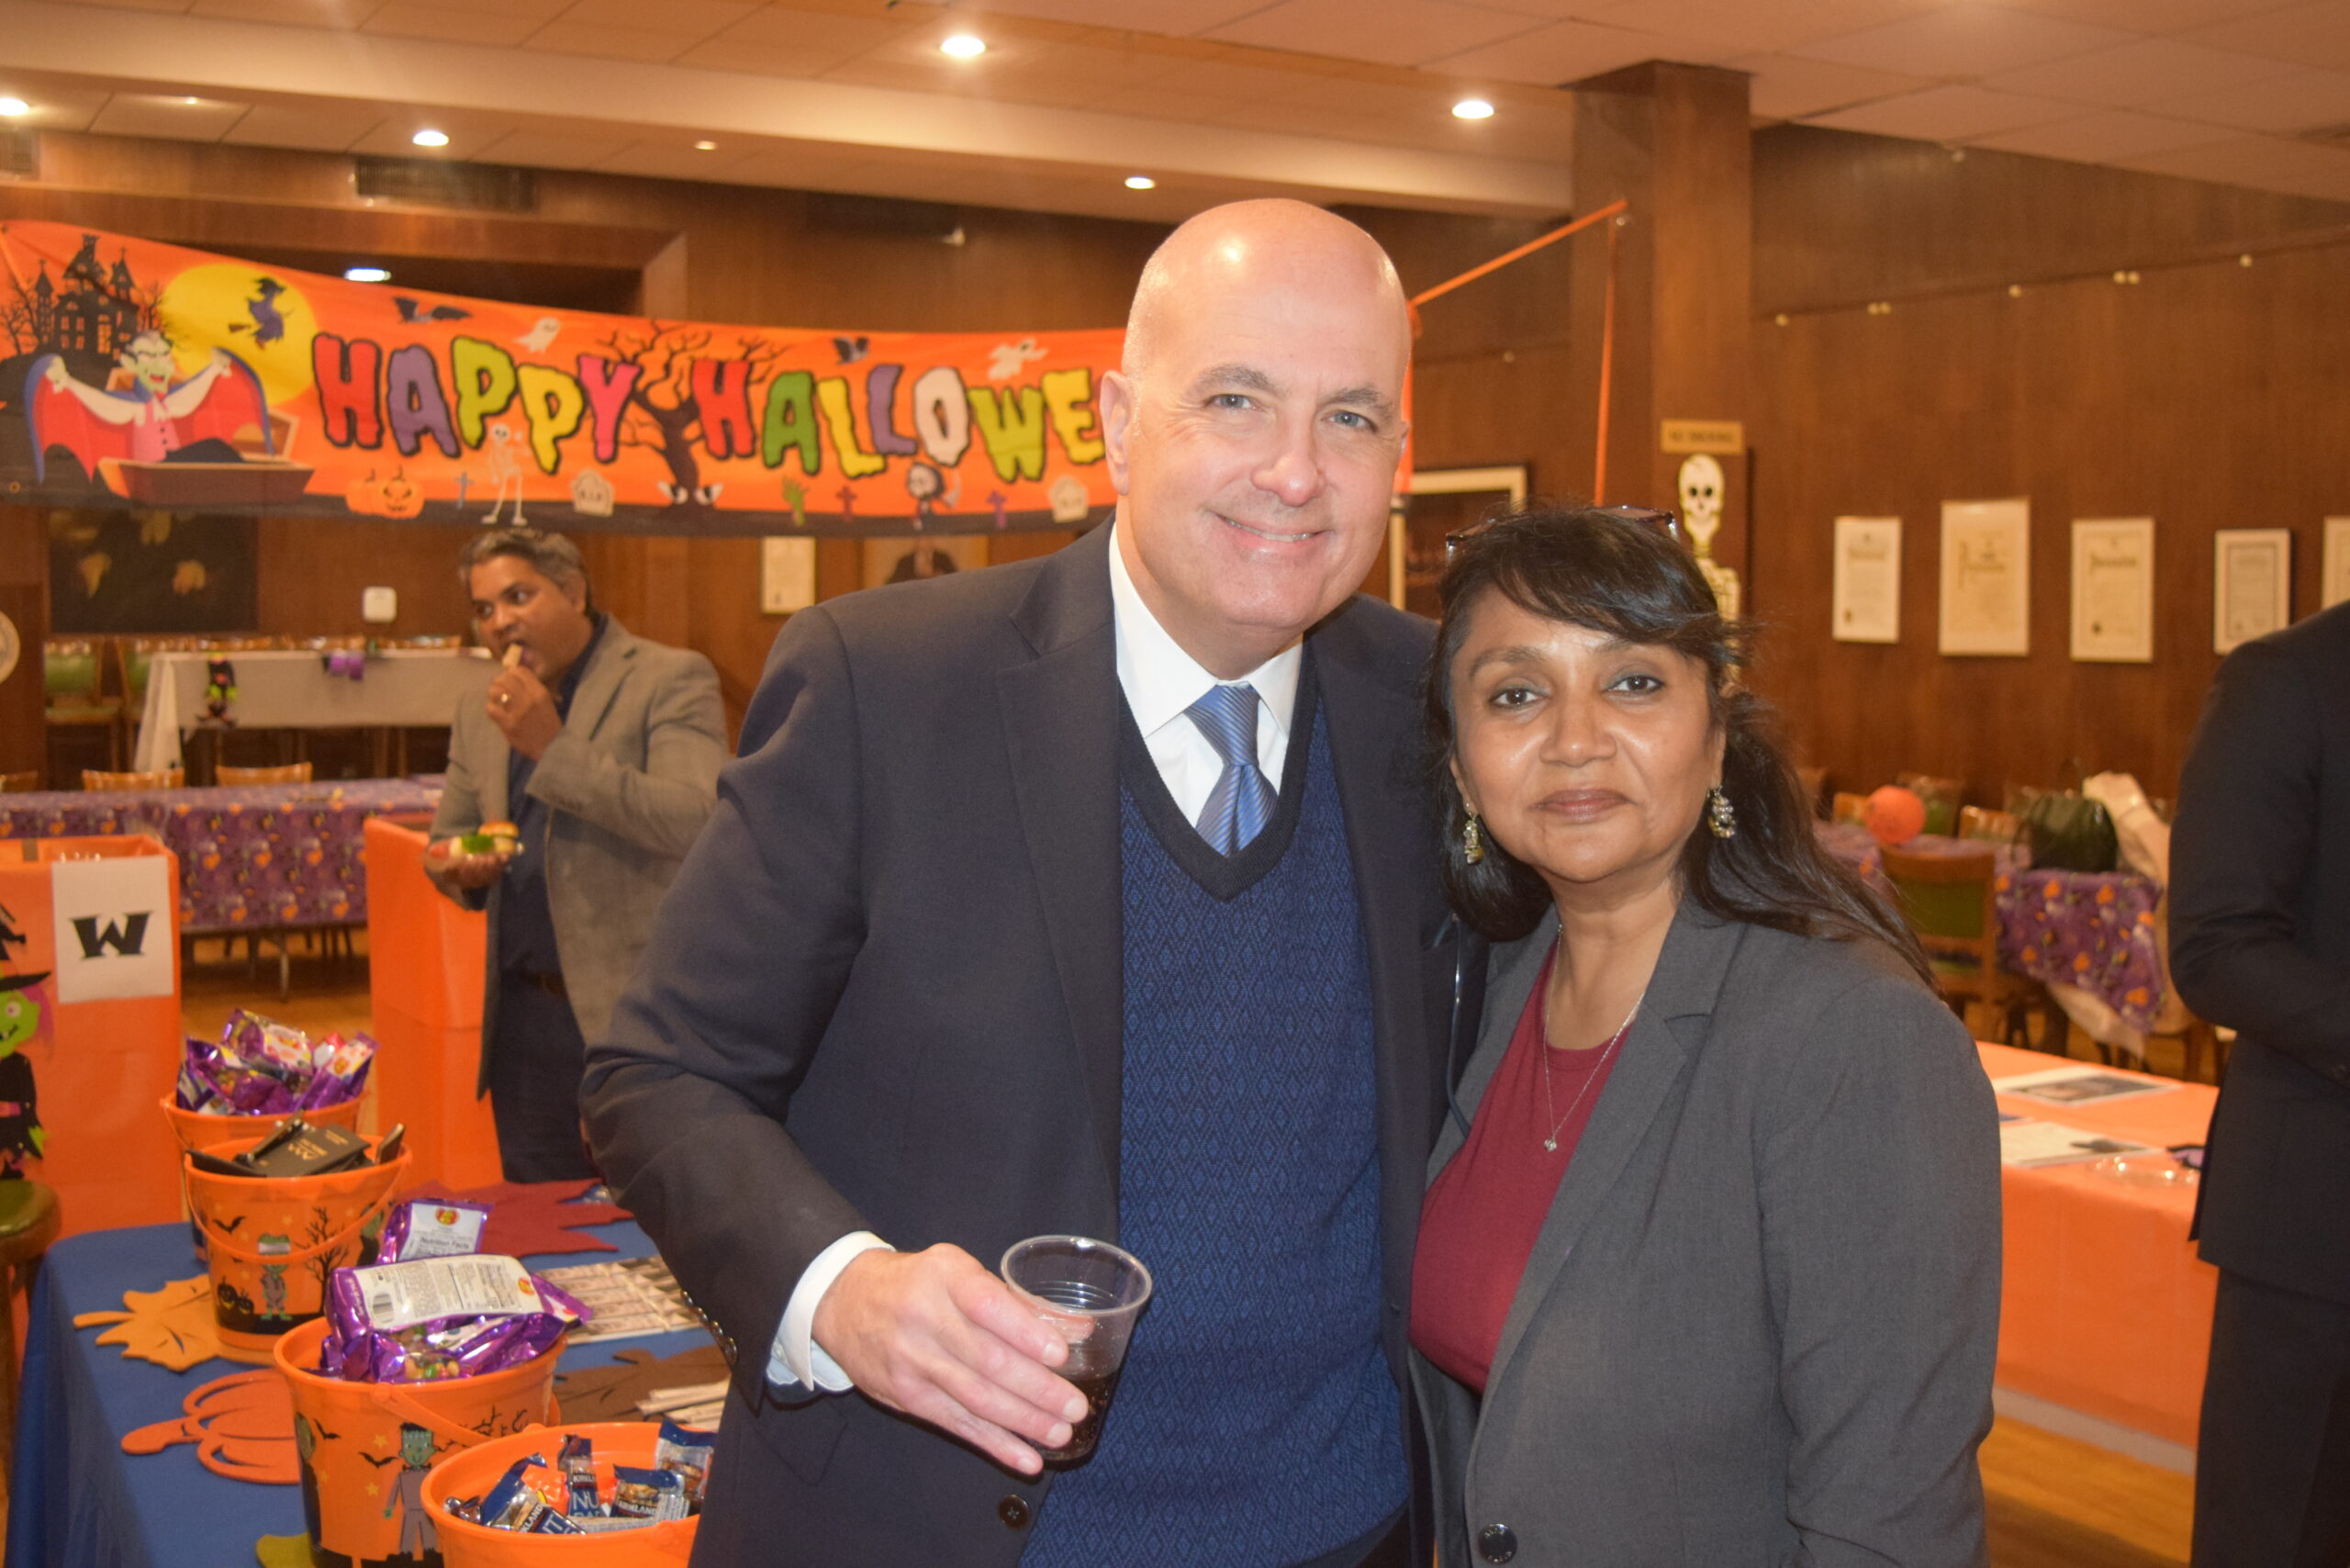 Justice Carl Landicino and Hemalee Patel at BBA Halloween-themed fundraiser.